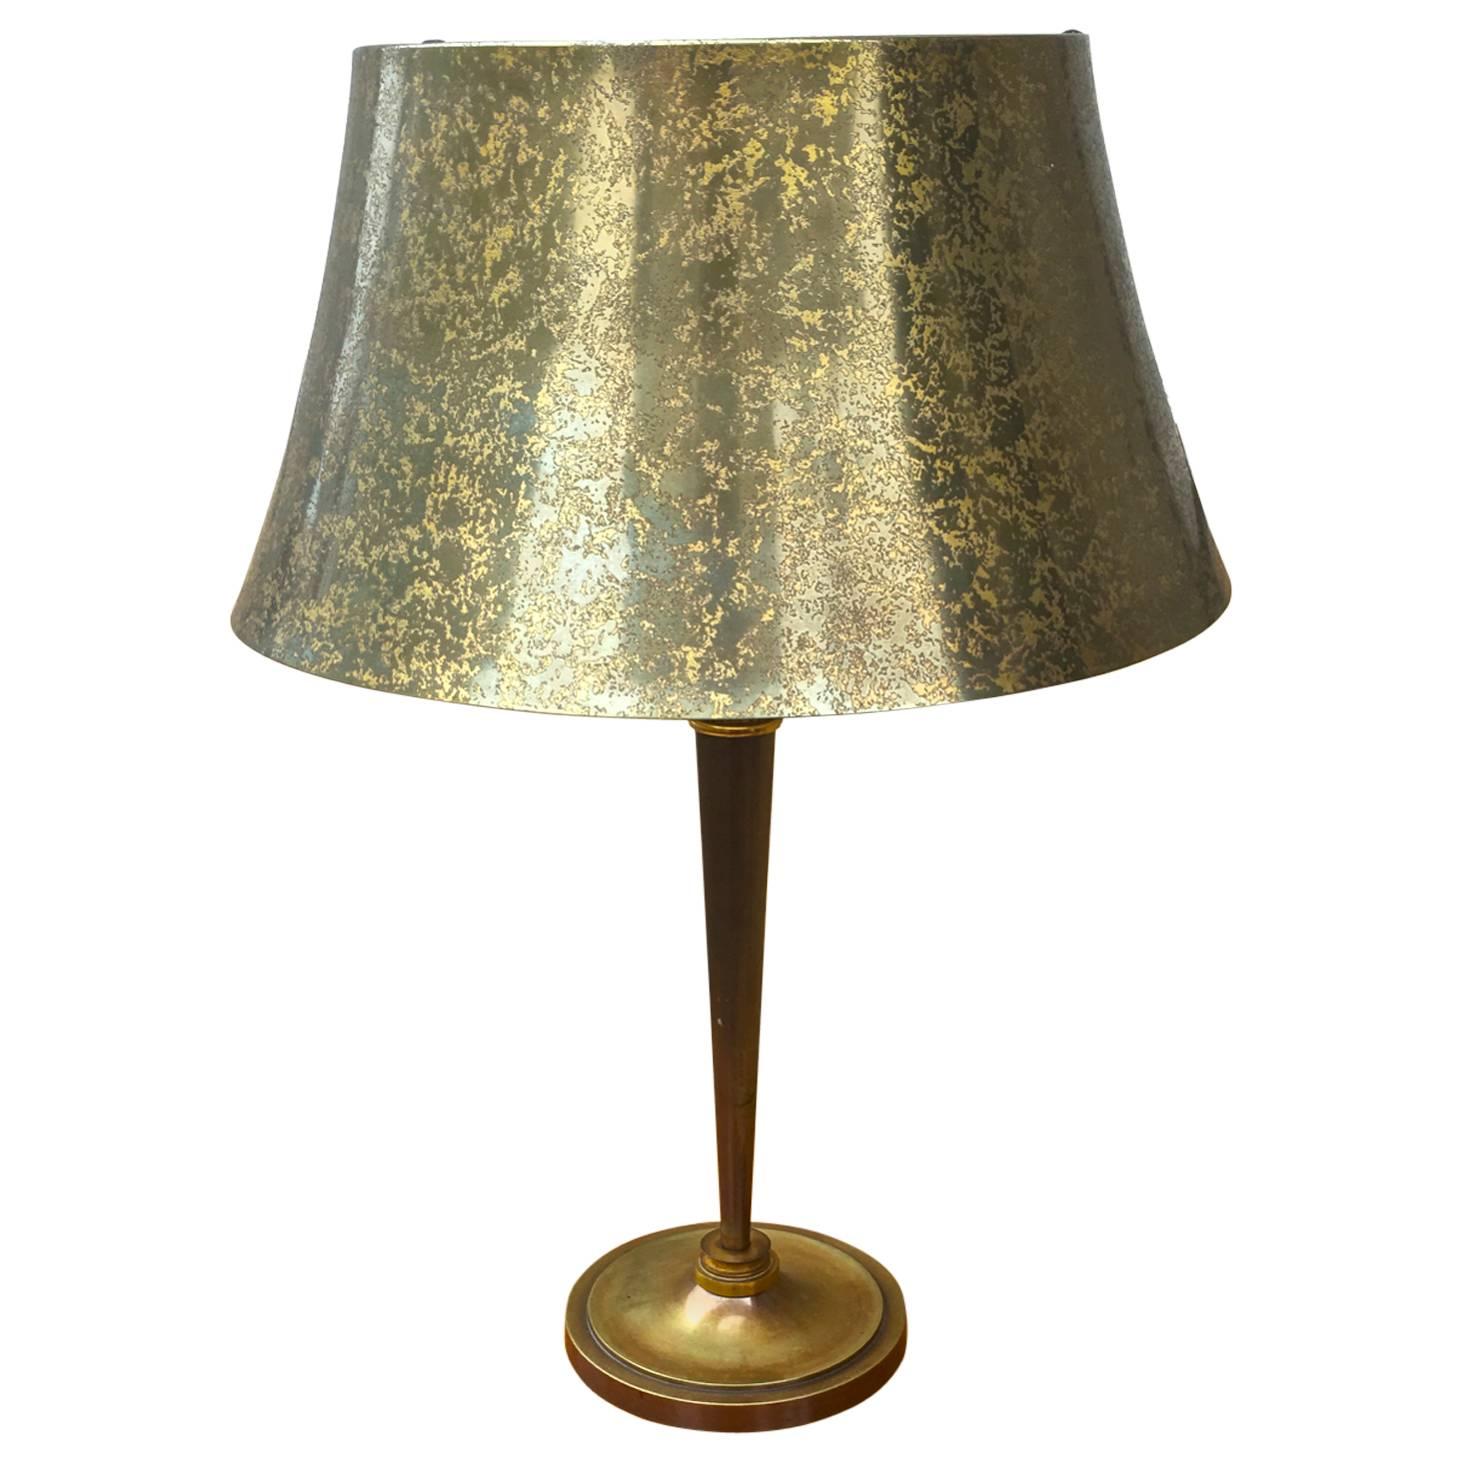 Genet Michon Superb Quality Gold Bronze Desk Lamp with Acid Engraved Shade For Sale